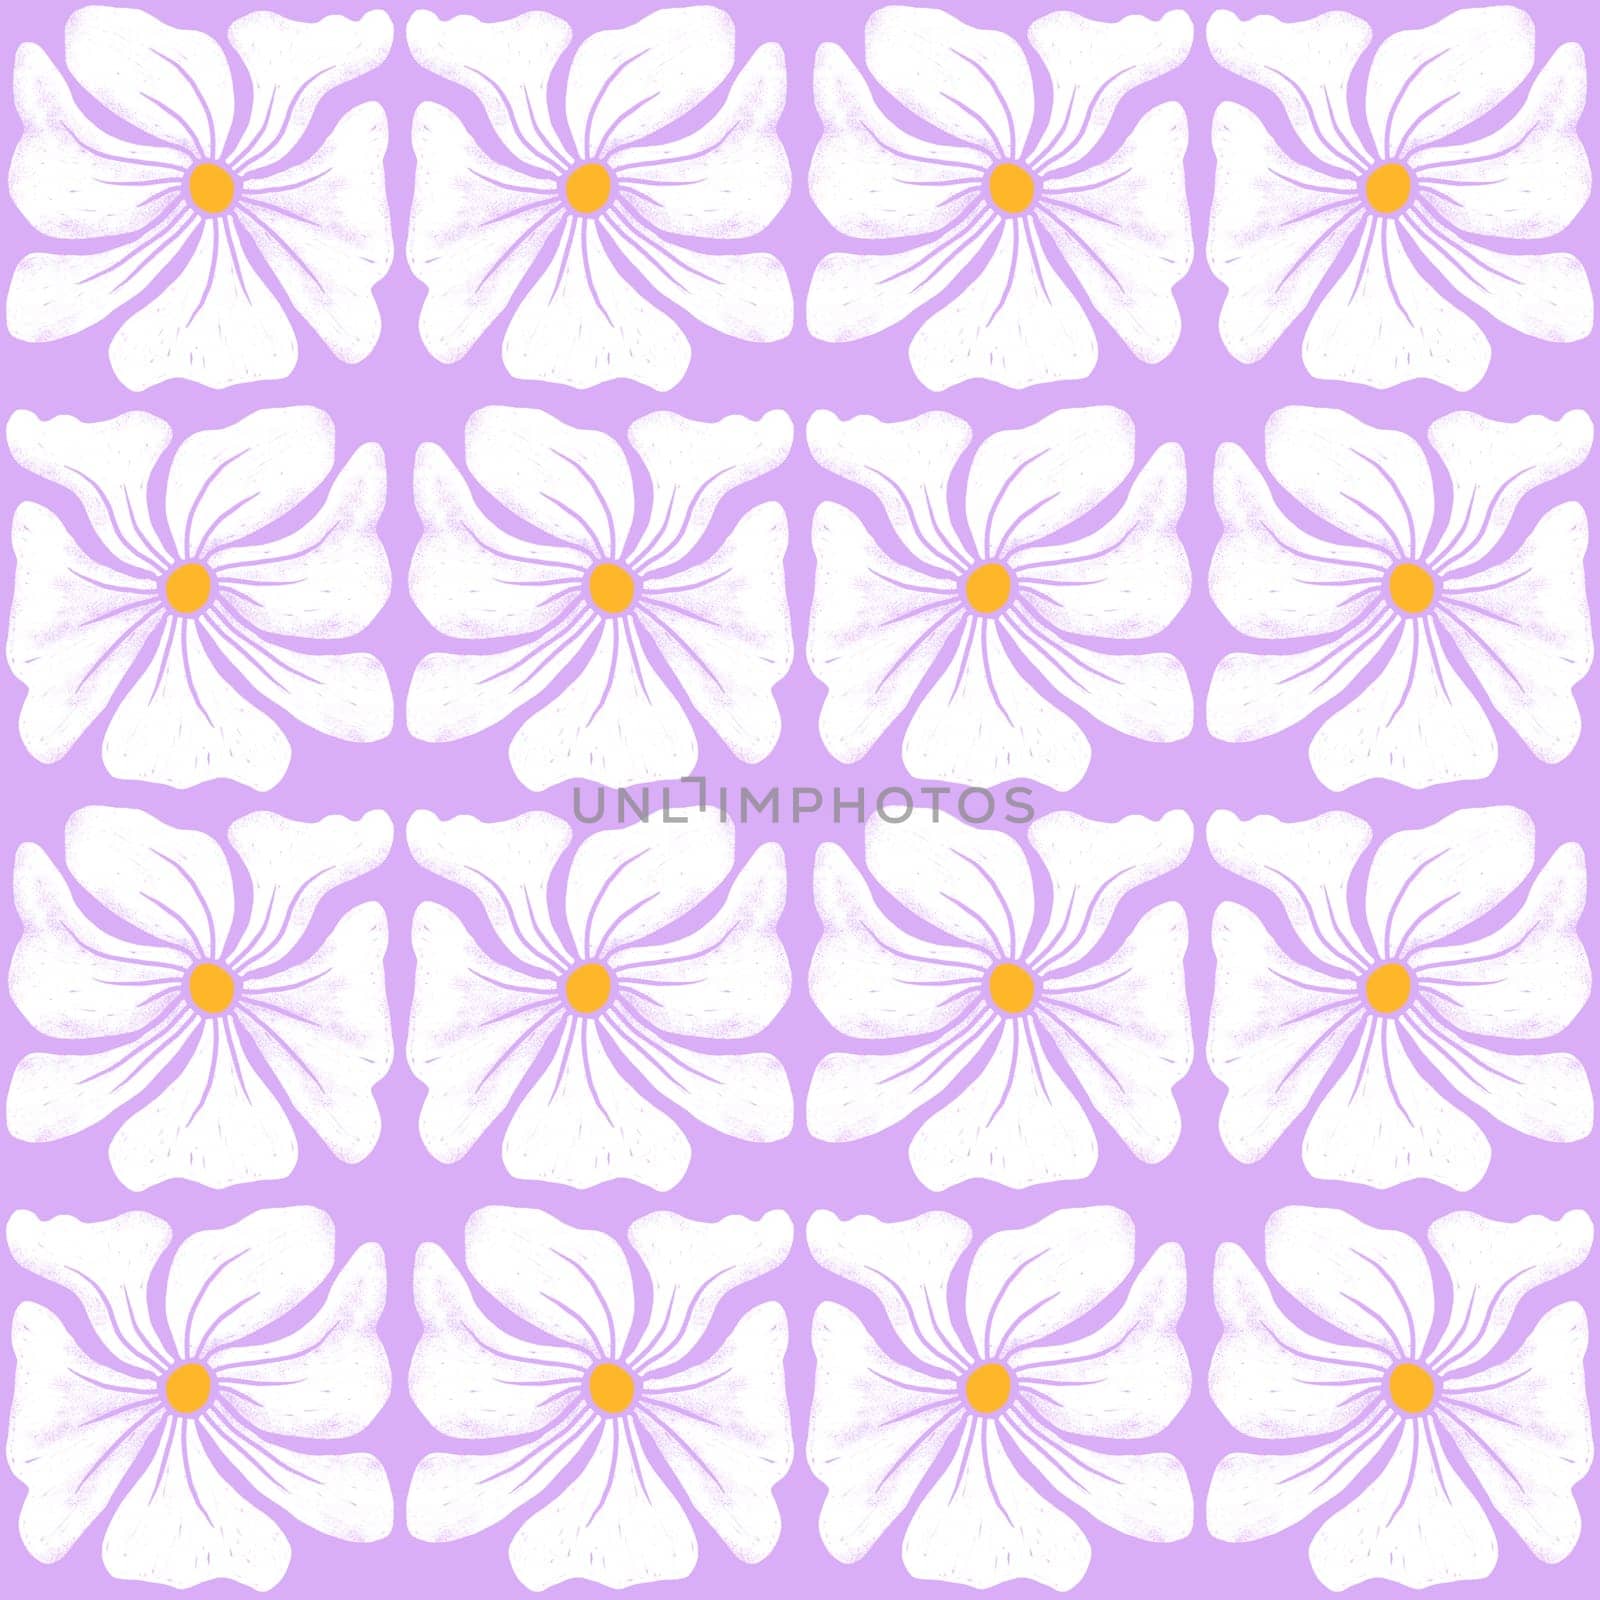 Hand drawn seamless pattern with white mid century modern daisy flowers on purplebackground. Retro vintage floral print with red blobs, hippie bloom blossom nature design, warm pastel color. by Lagmar